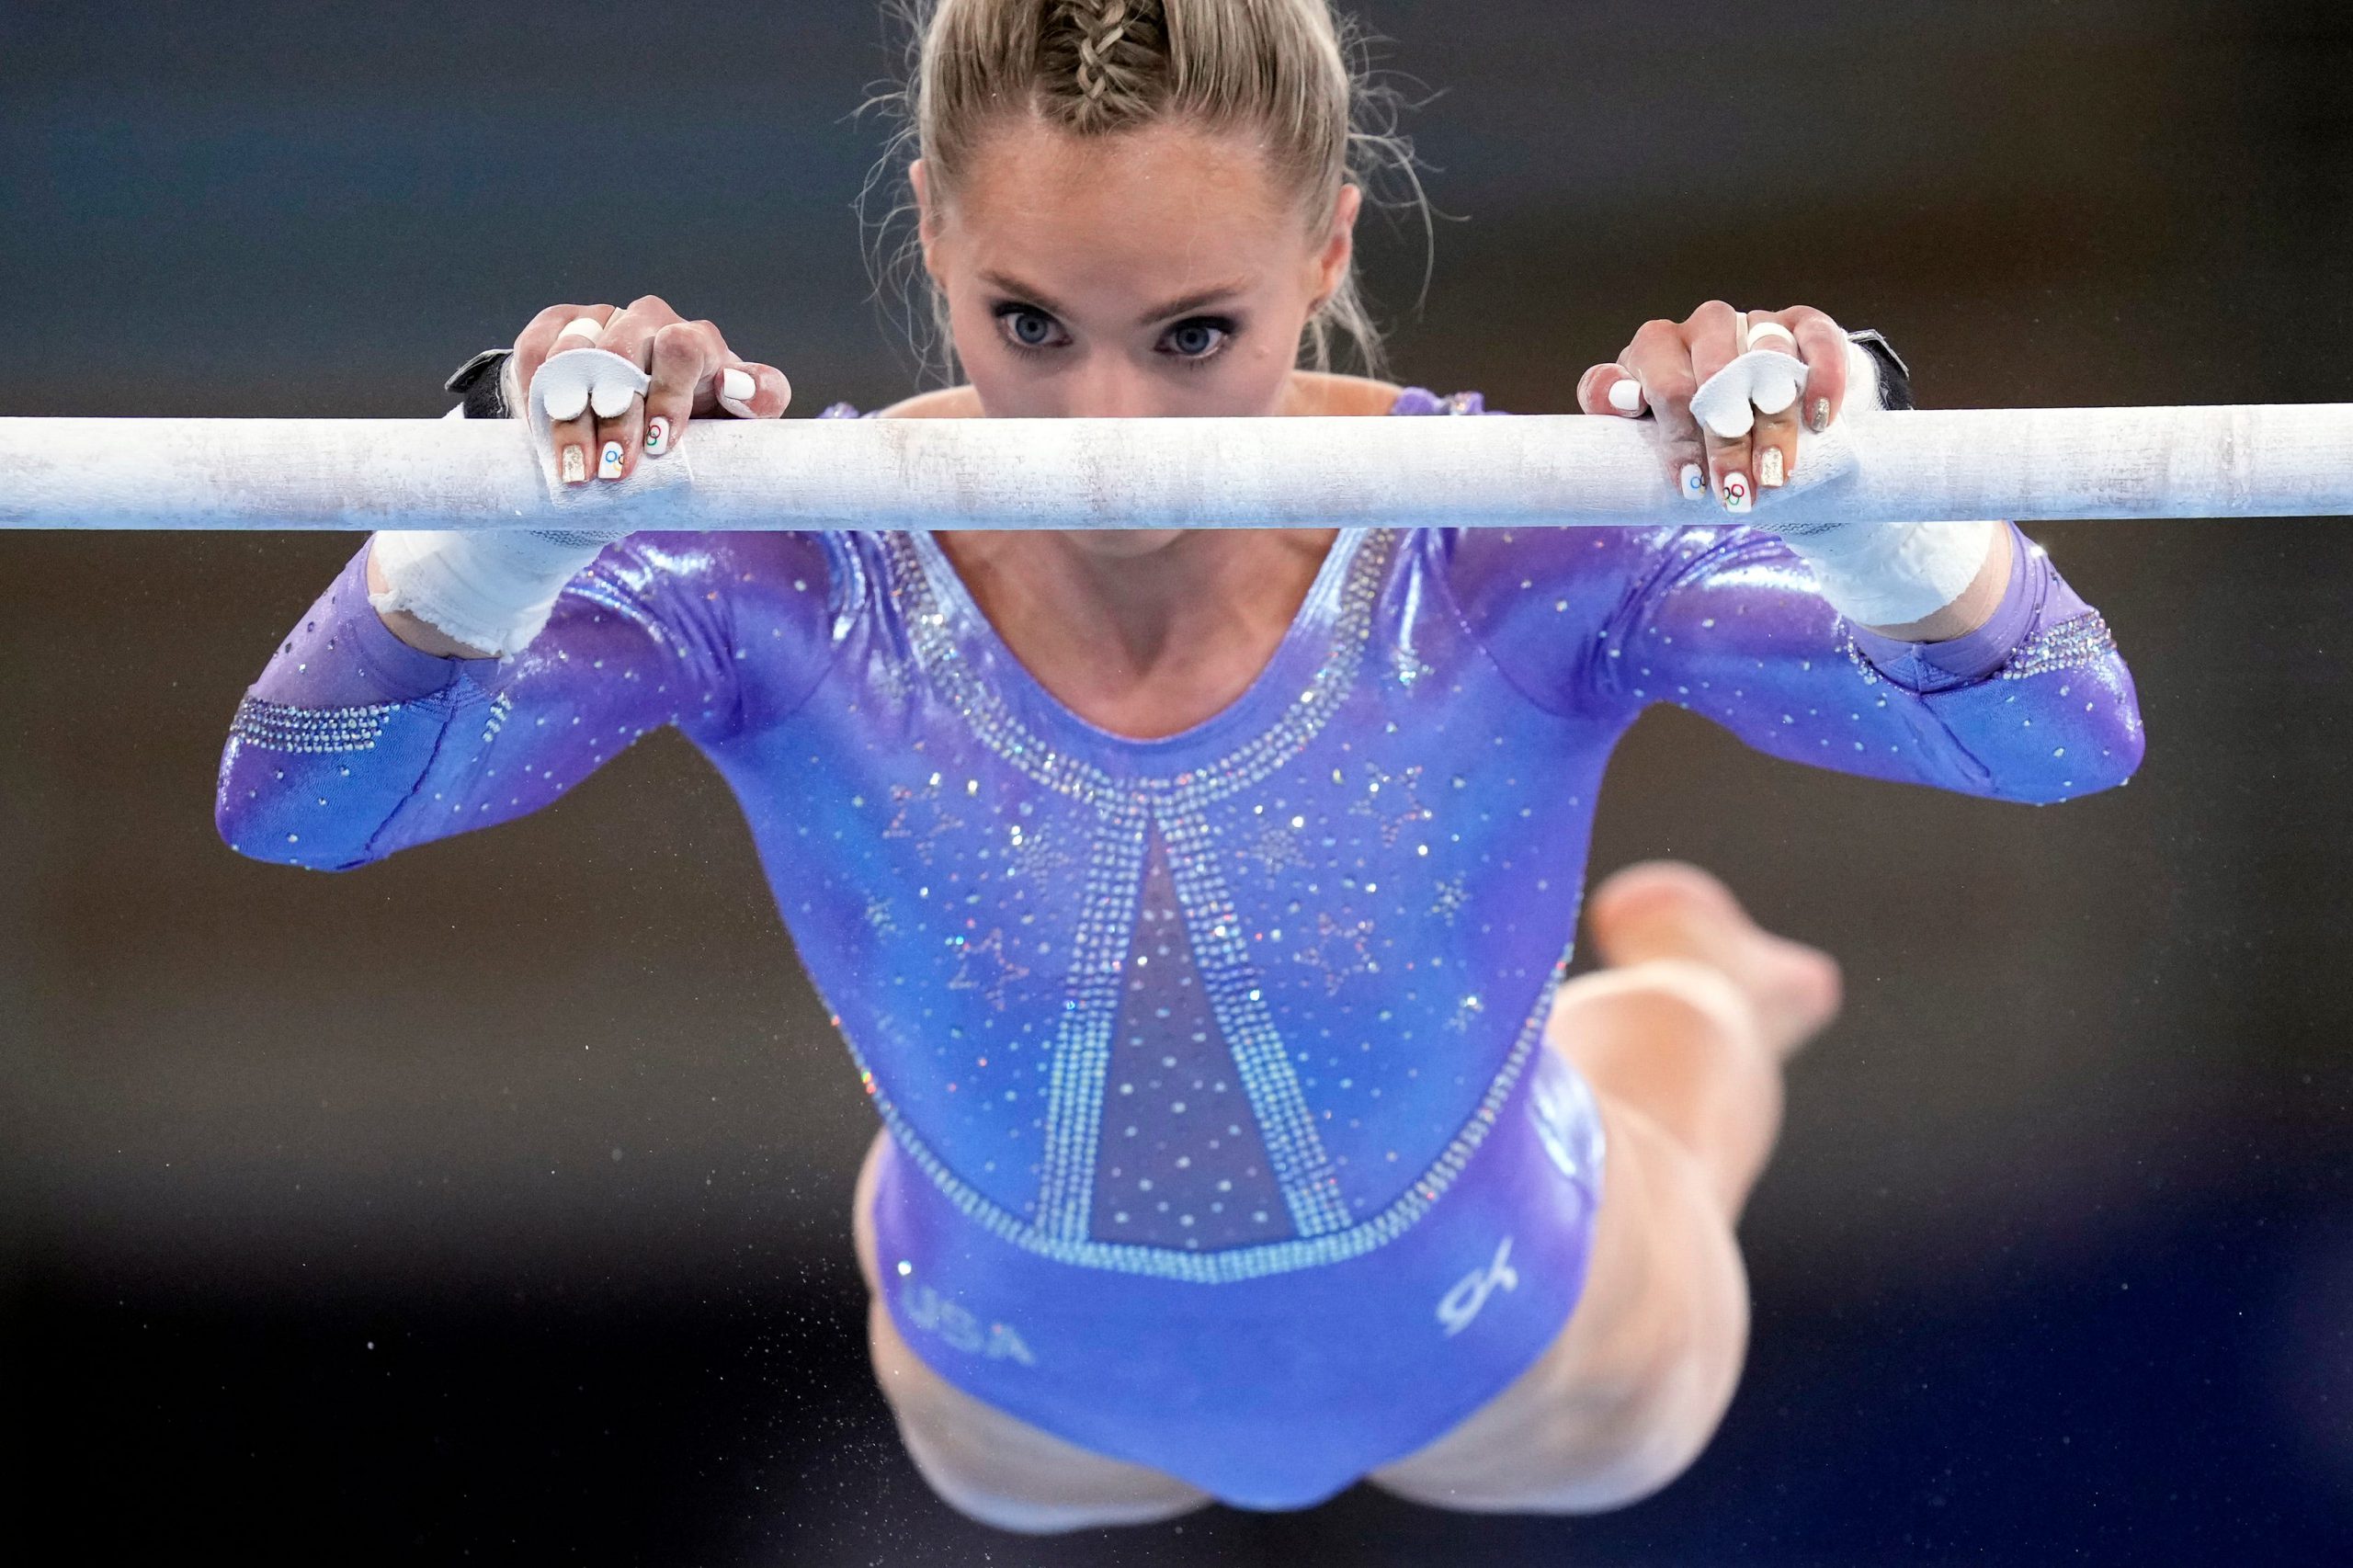 Tokyo Olympics: Women's Artistic Team All-Around Finals to be Underway Today